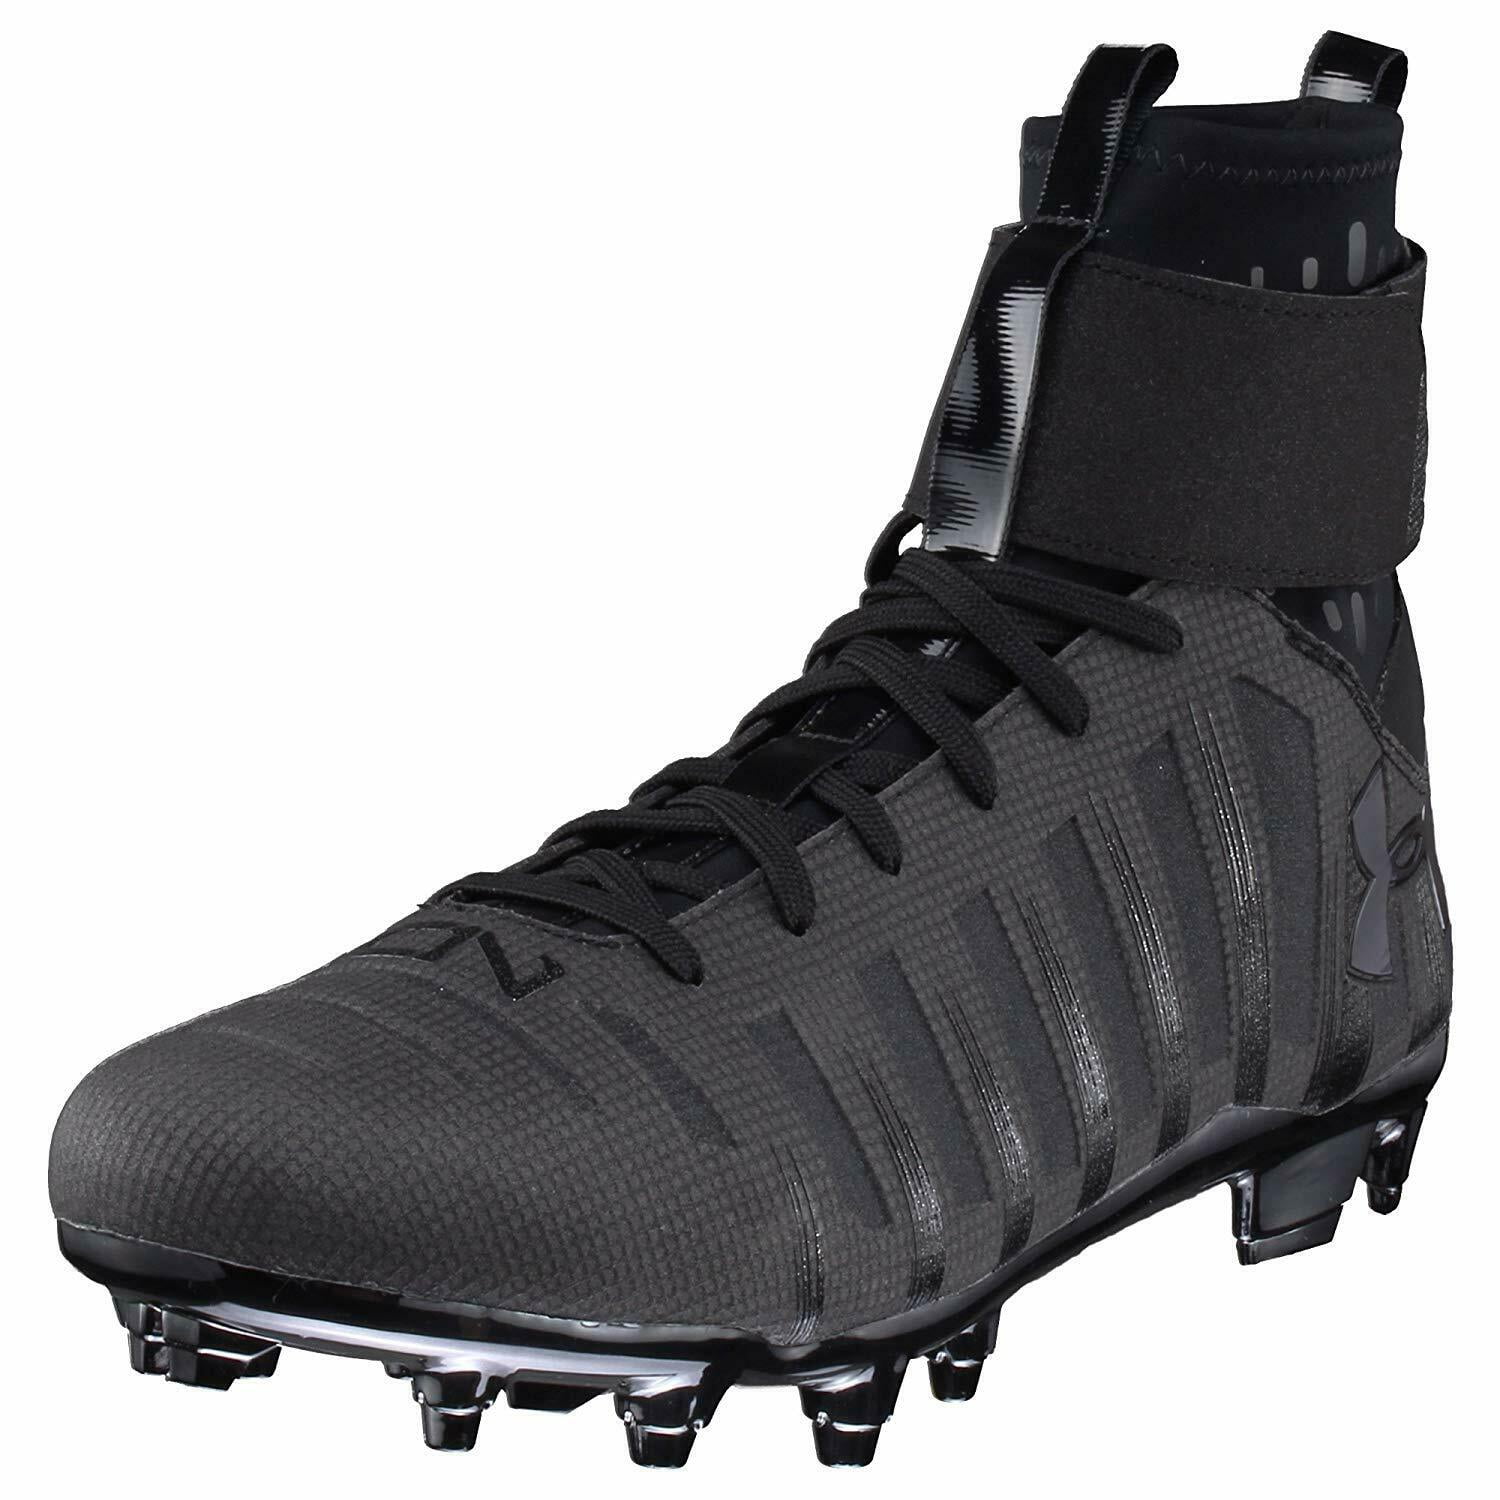 Details about   Under Armour C1N Mid D Size 13 Football Cleats Shoes Black/White 1264317-001 NIB 